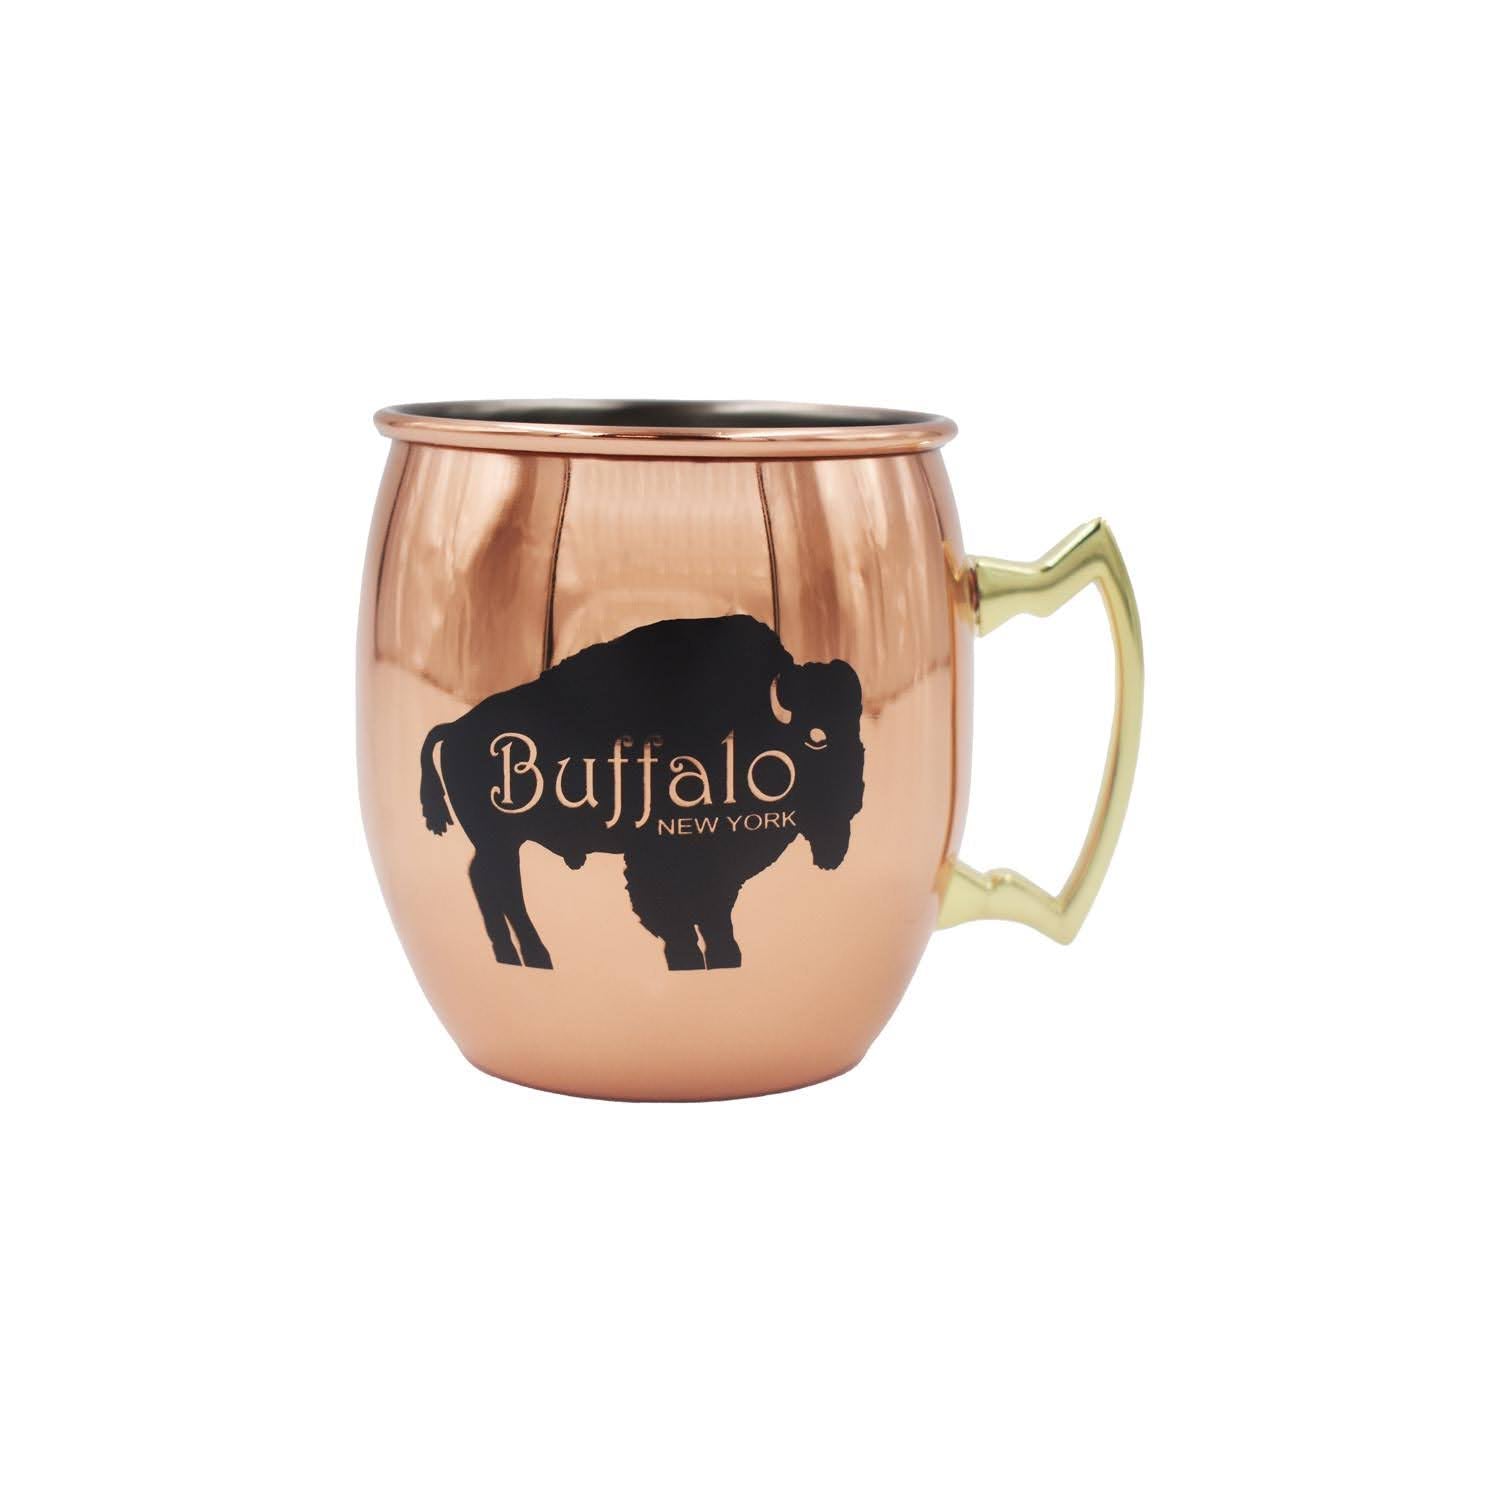 bflo store buffalo new york stainless steel cooper moscow mule mug